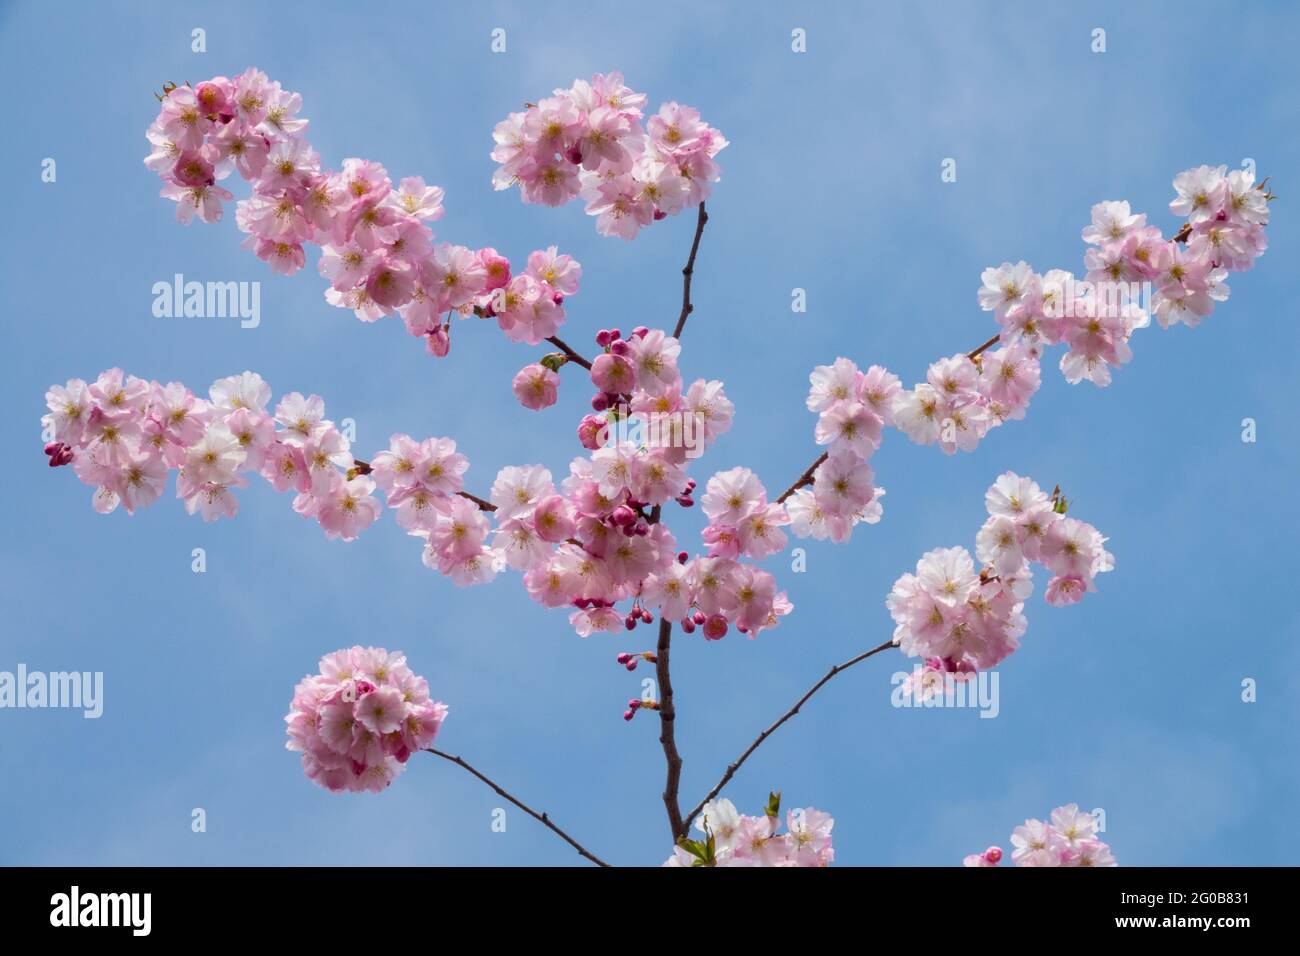 Prunus Pink Flowers Blossoms Against blue sky Pink flowers Blooming Blooms Branches Flowering Cherry blossoms Early Spring Rosea Colour April Stock Photo